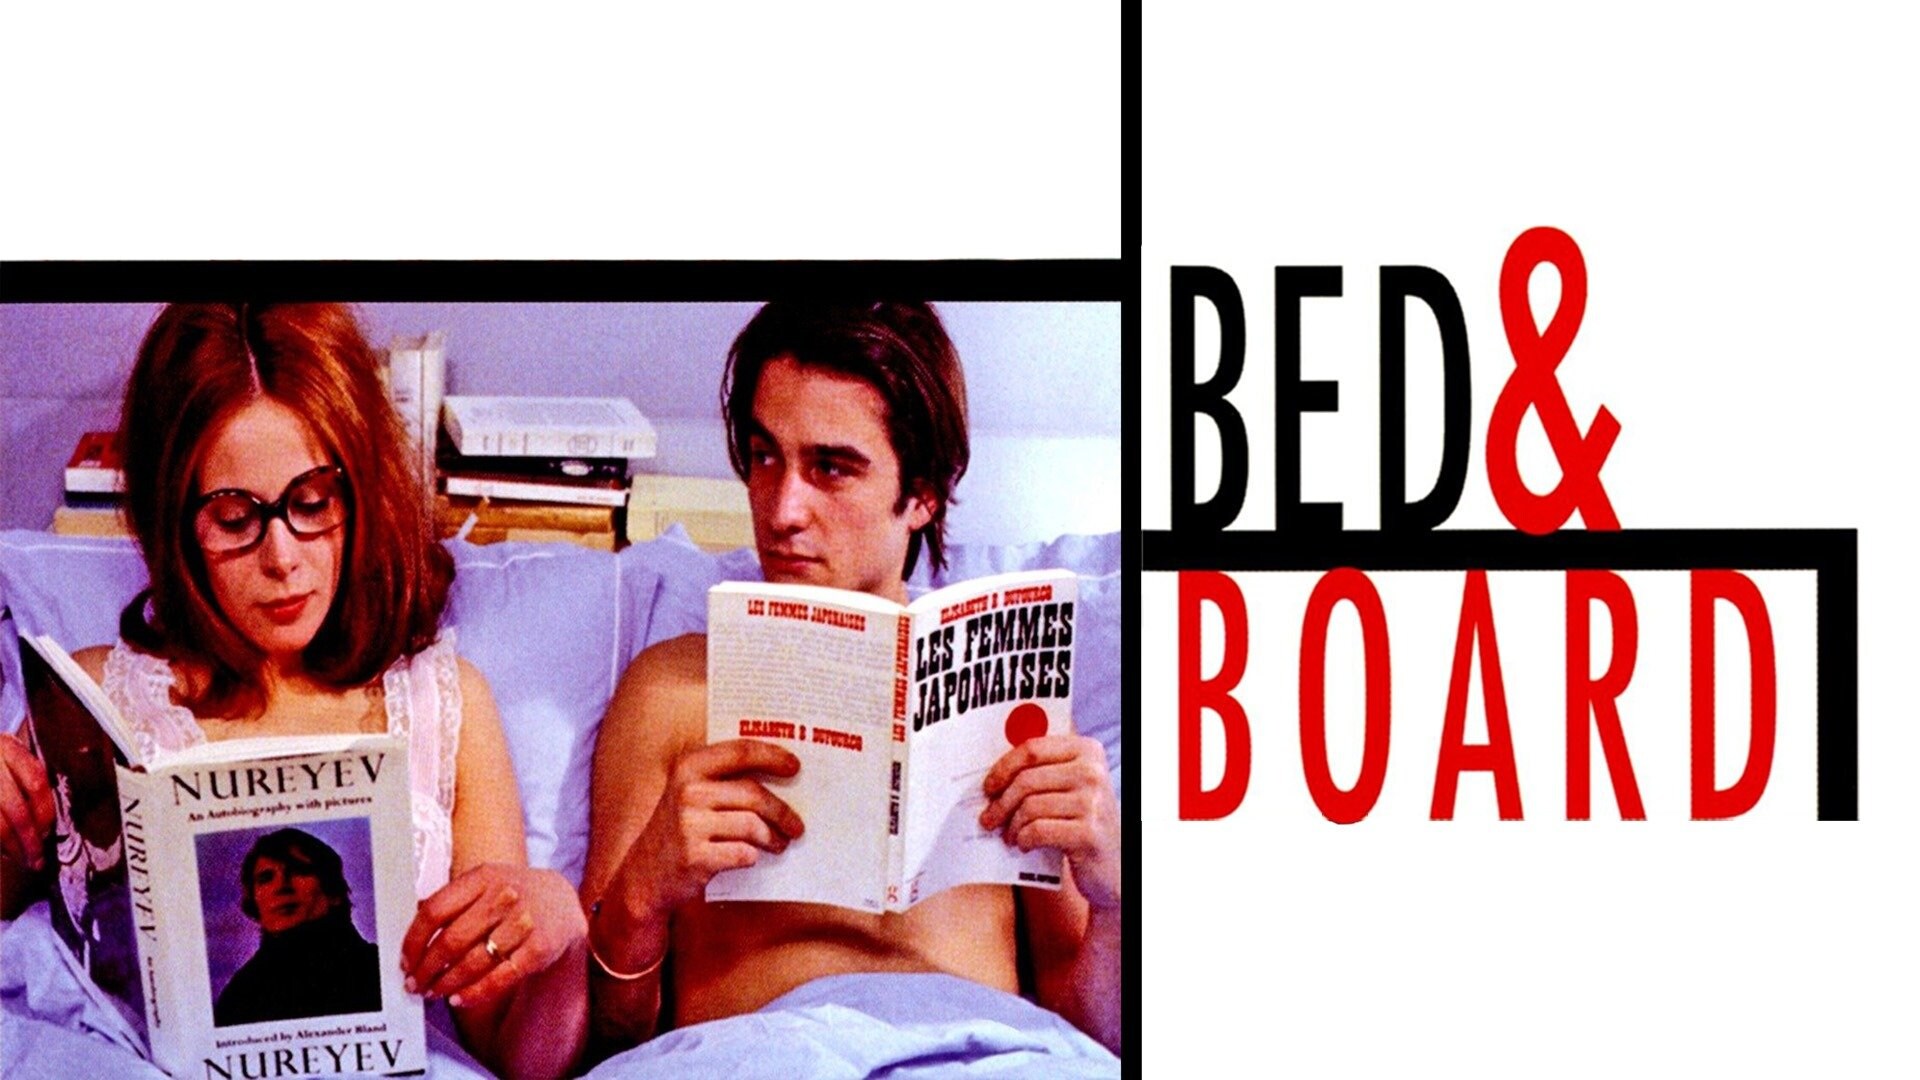 46-facts-about-the-movie-bed-board